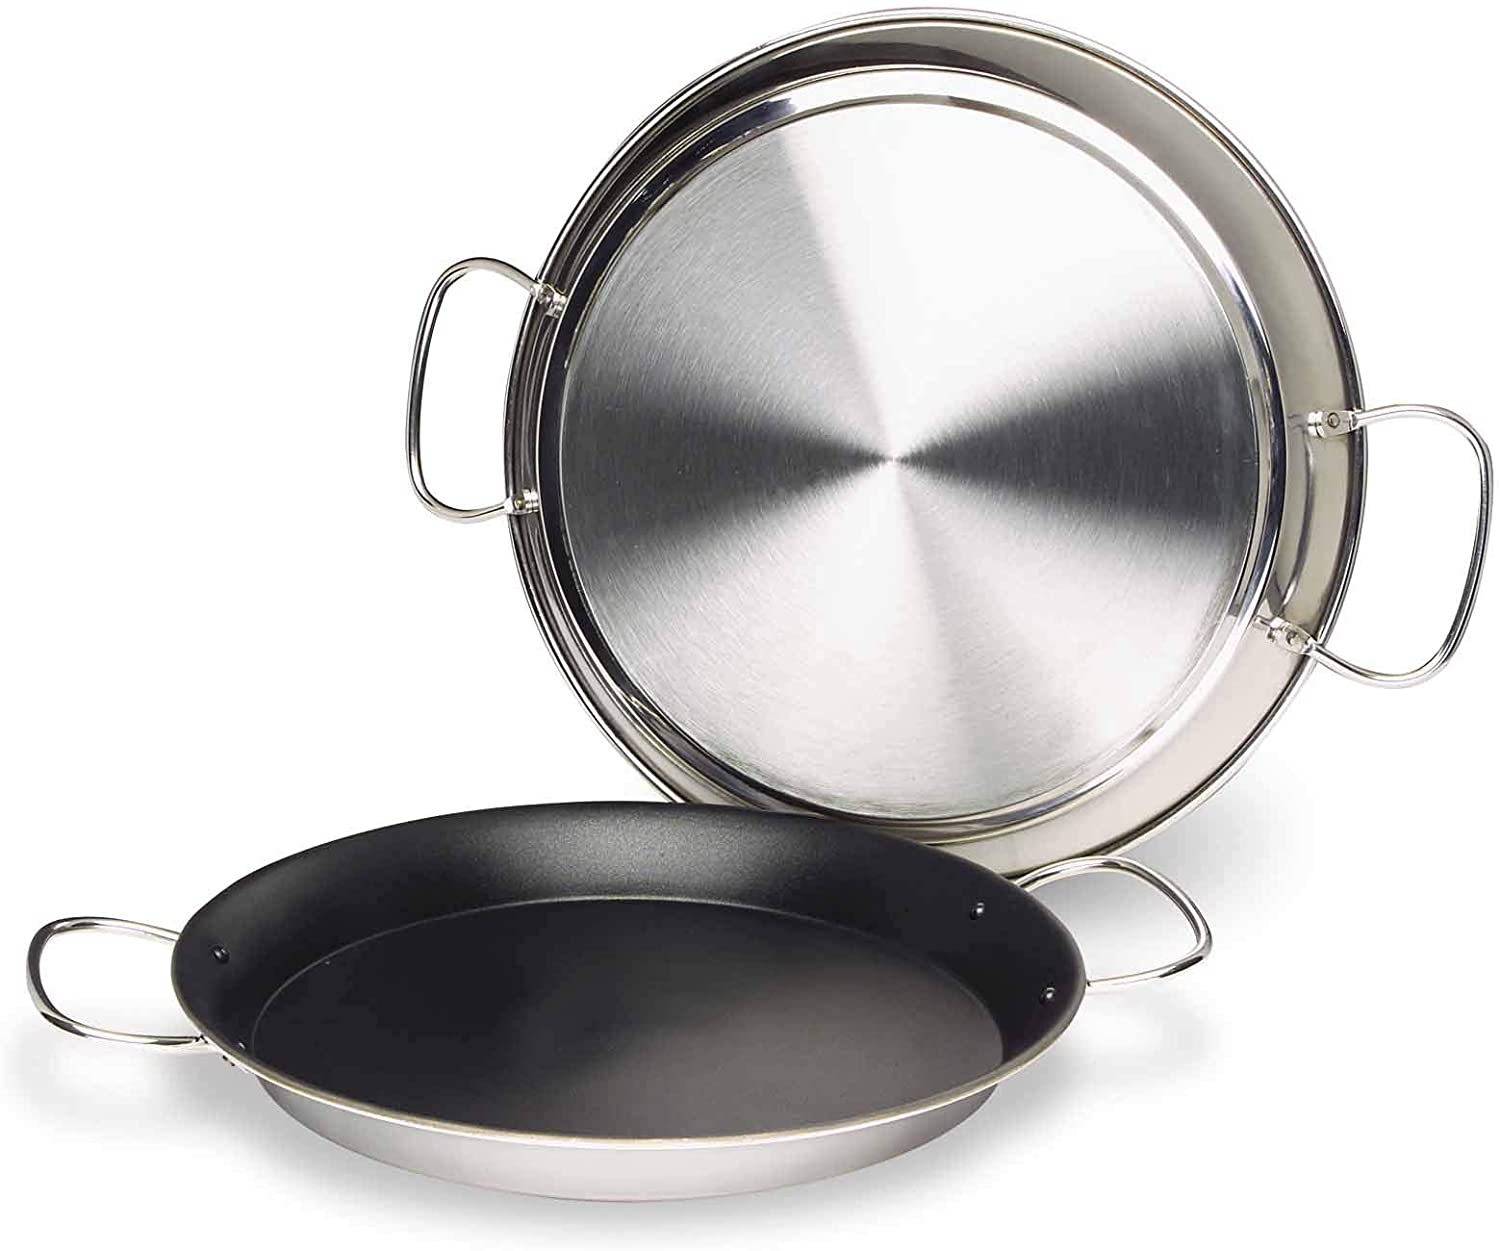 LACOR Stainless Steel Non-Stick Round Dish for Paella